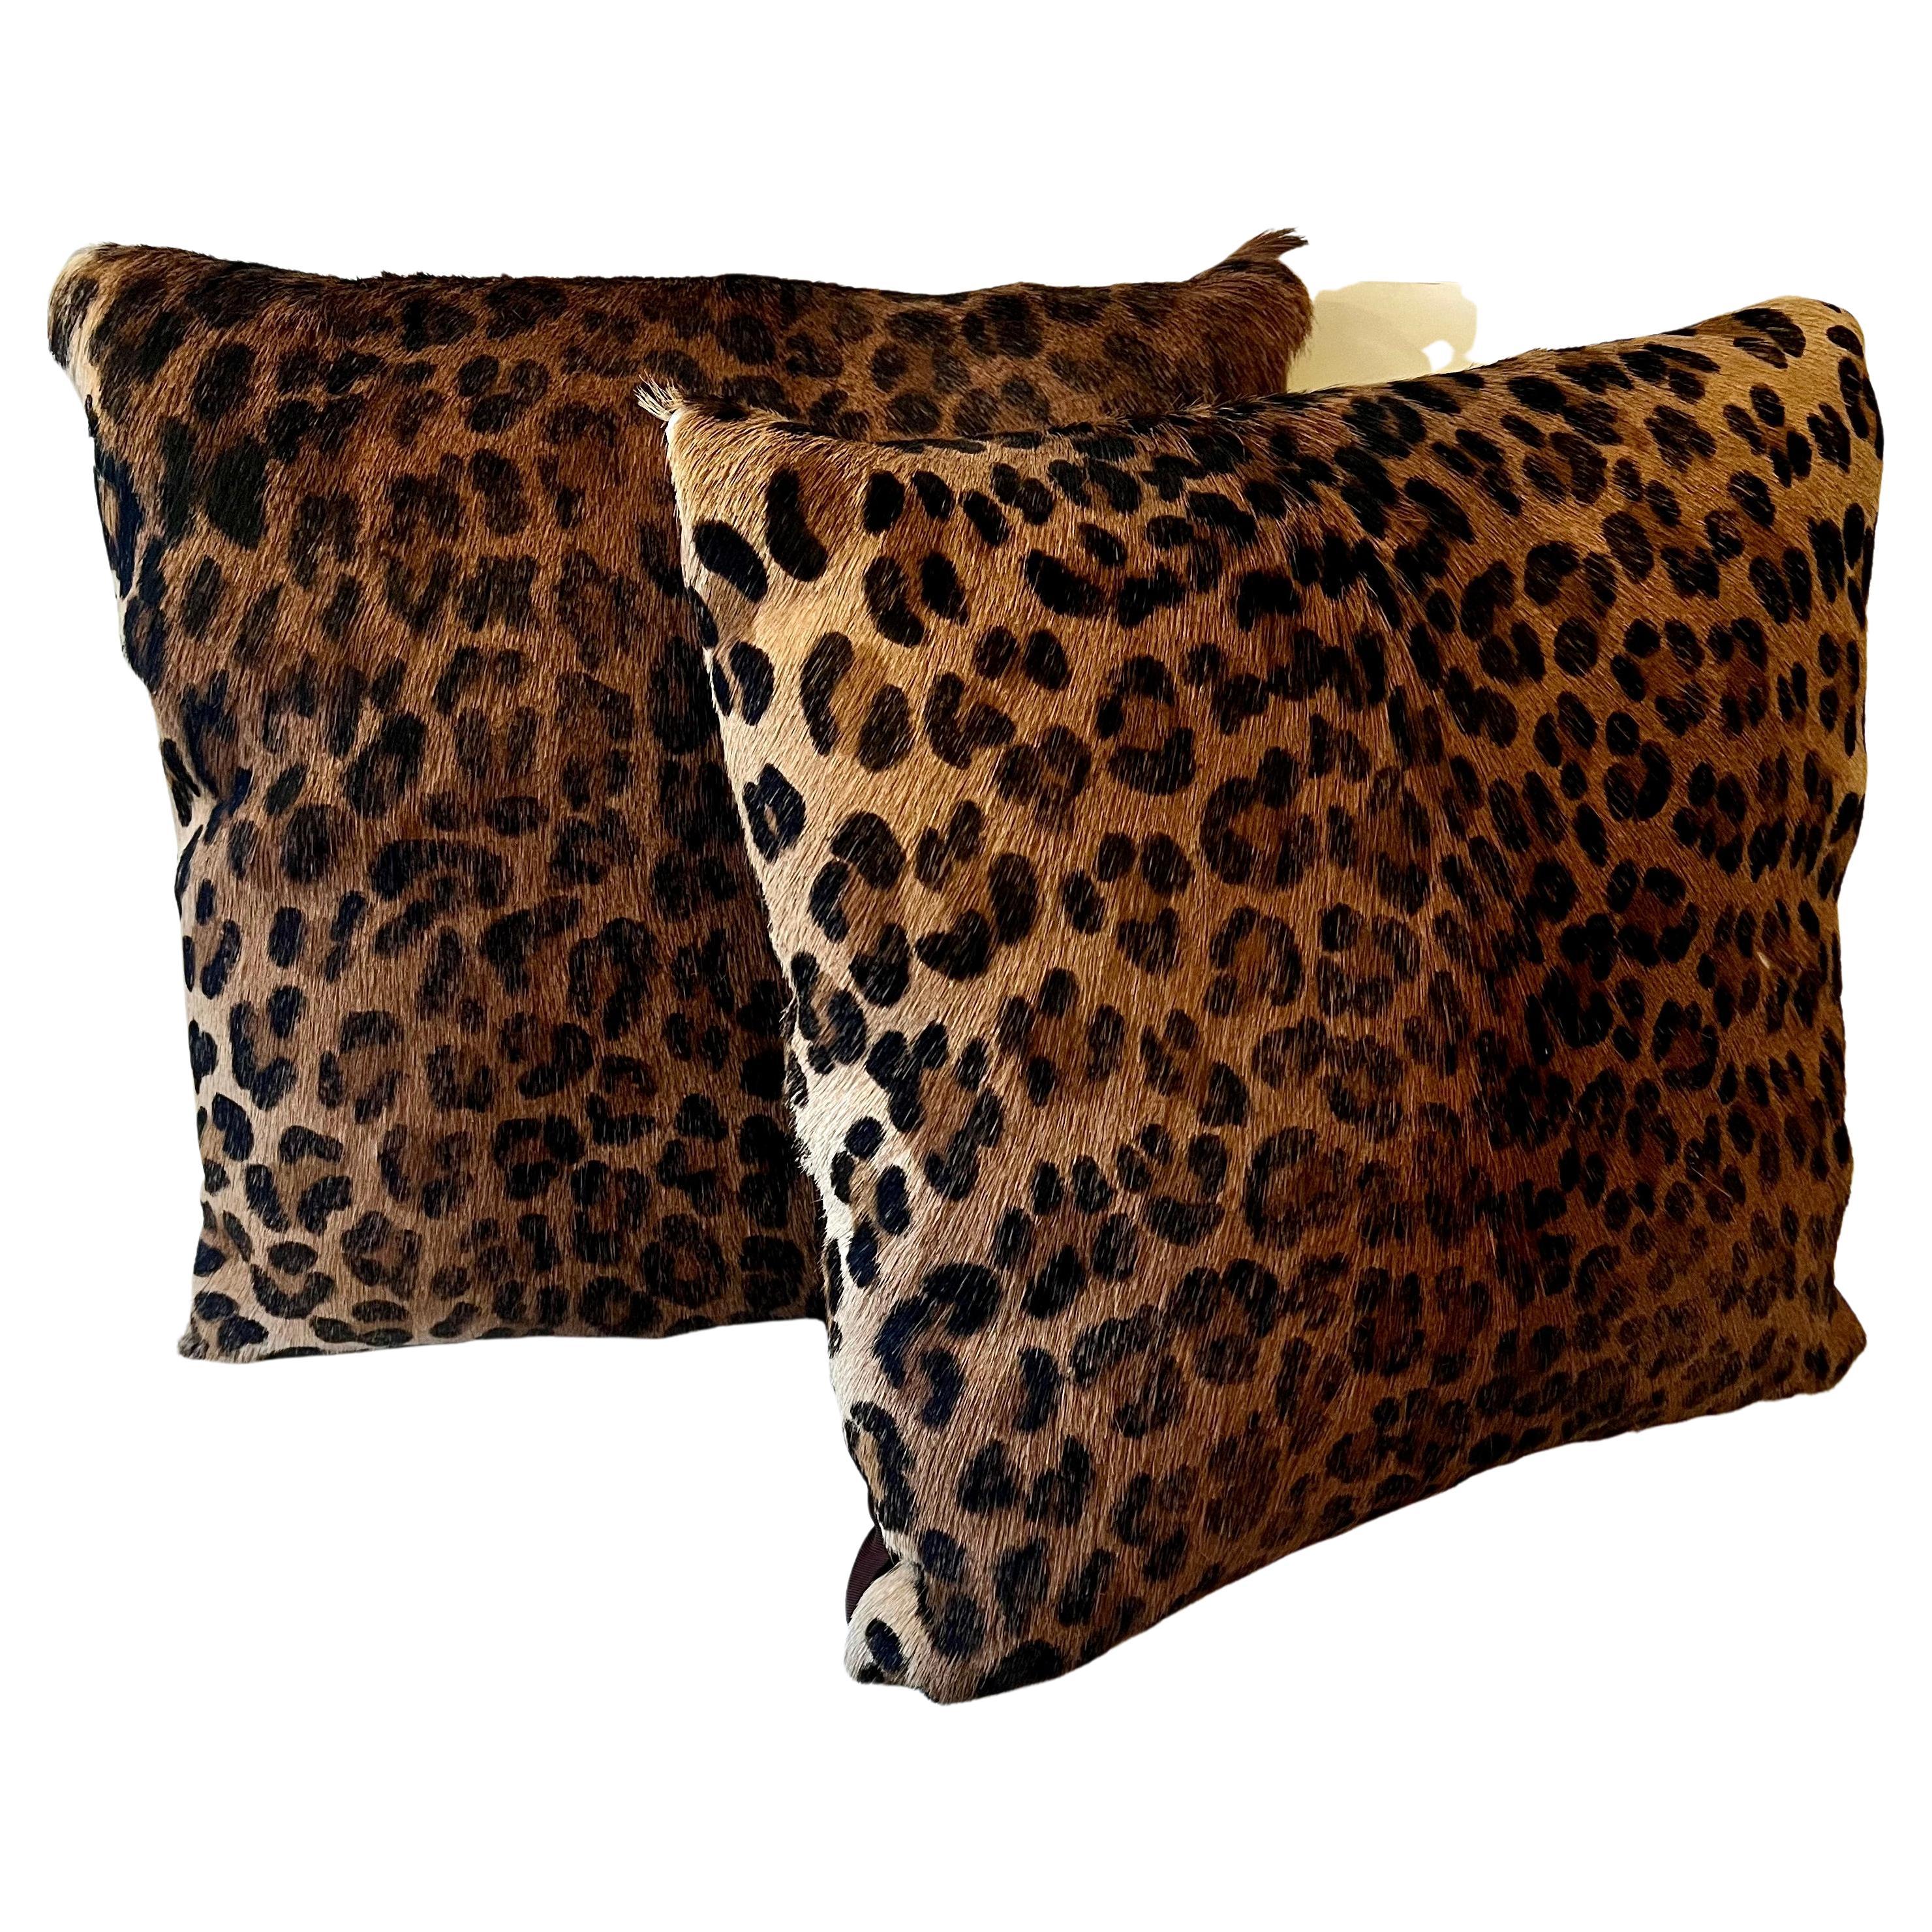 A pair of leopard cowhide printed pillows with a satin back and zipper. The pair are very nice and work well in many spaces. a compliment to ethnic or Ralph Lauren style rooms, but work most anywhere.